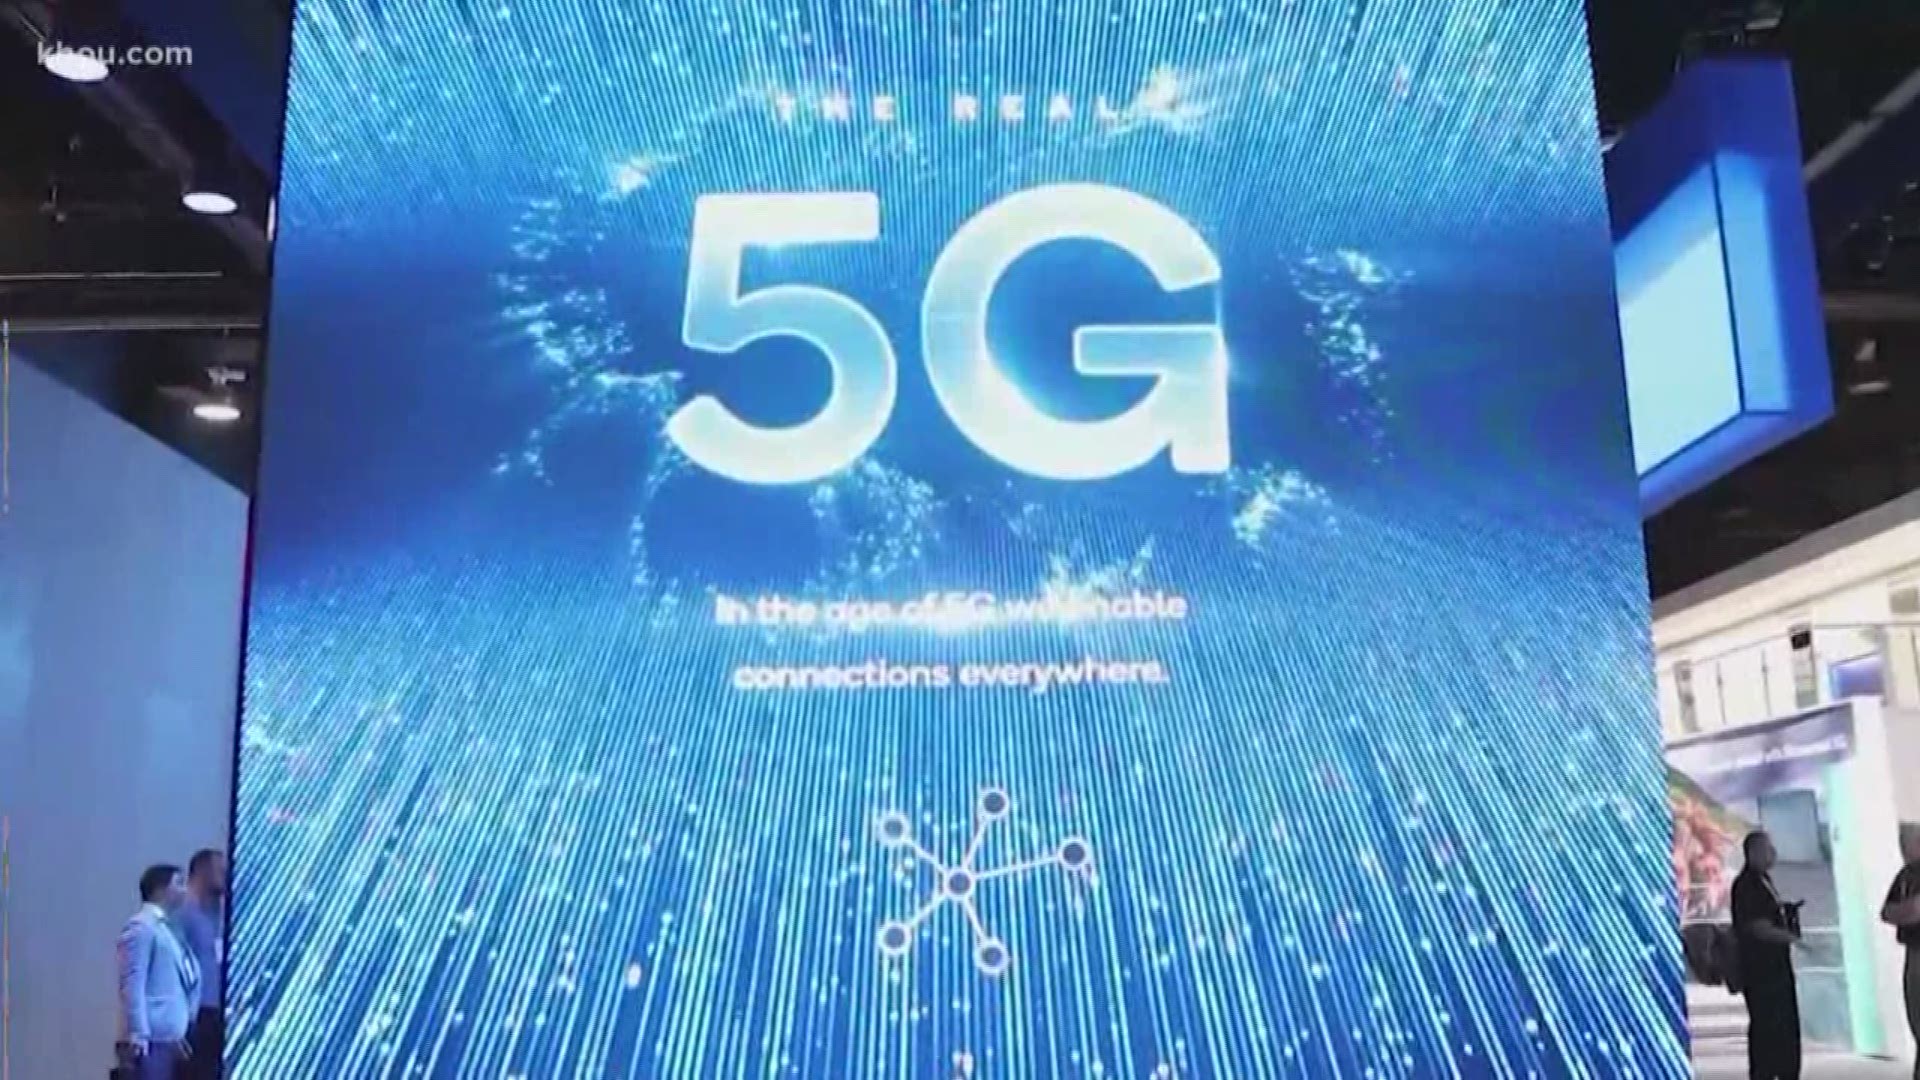 Companies like Verizon and AT&T are testing out their super fast 5G technology right here in Houston. But for all of the excitement, there are some concerns about the impact it could have on our health.